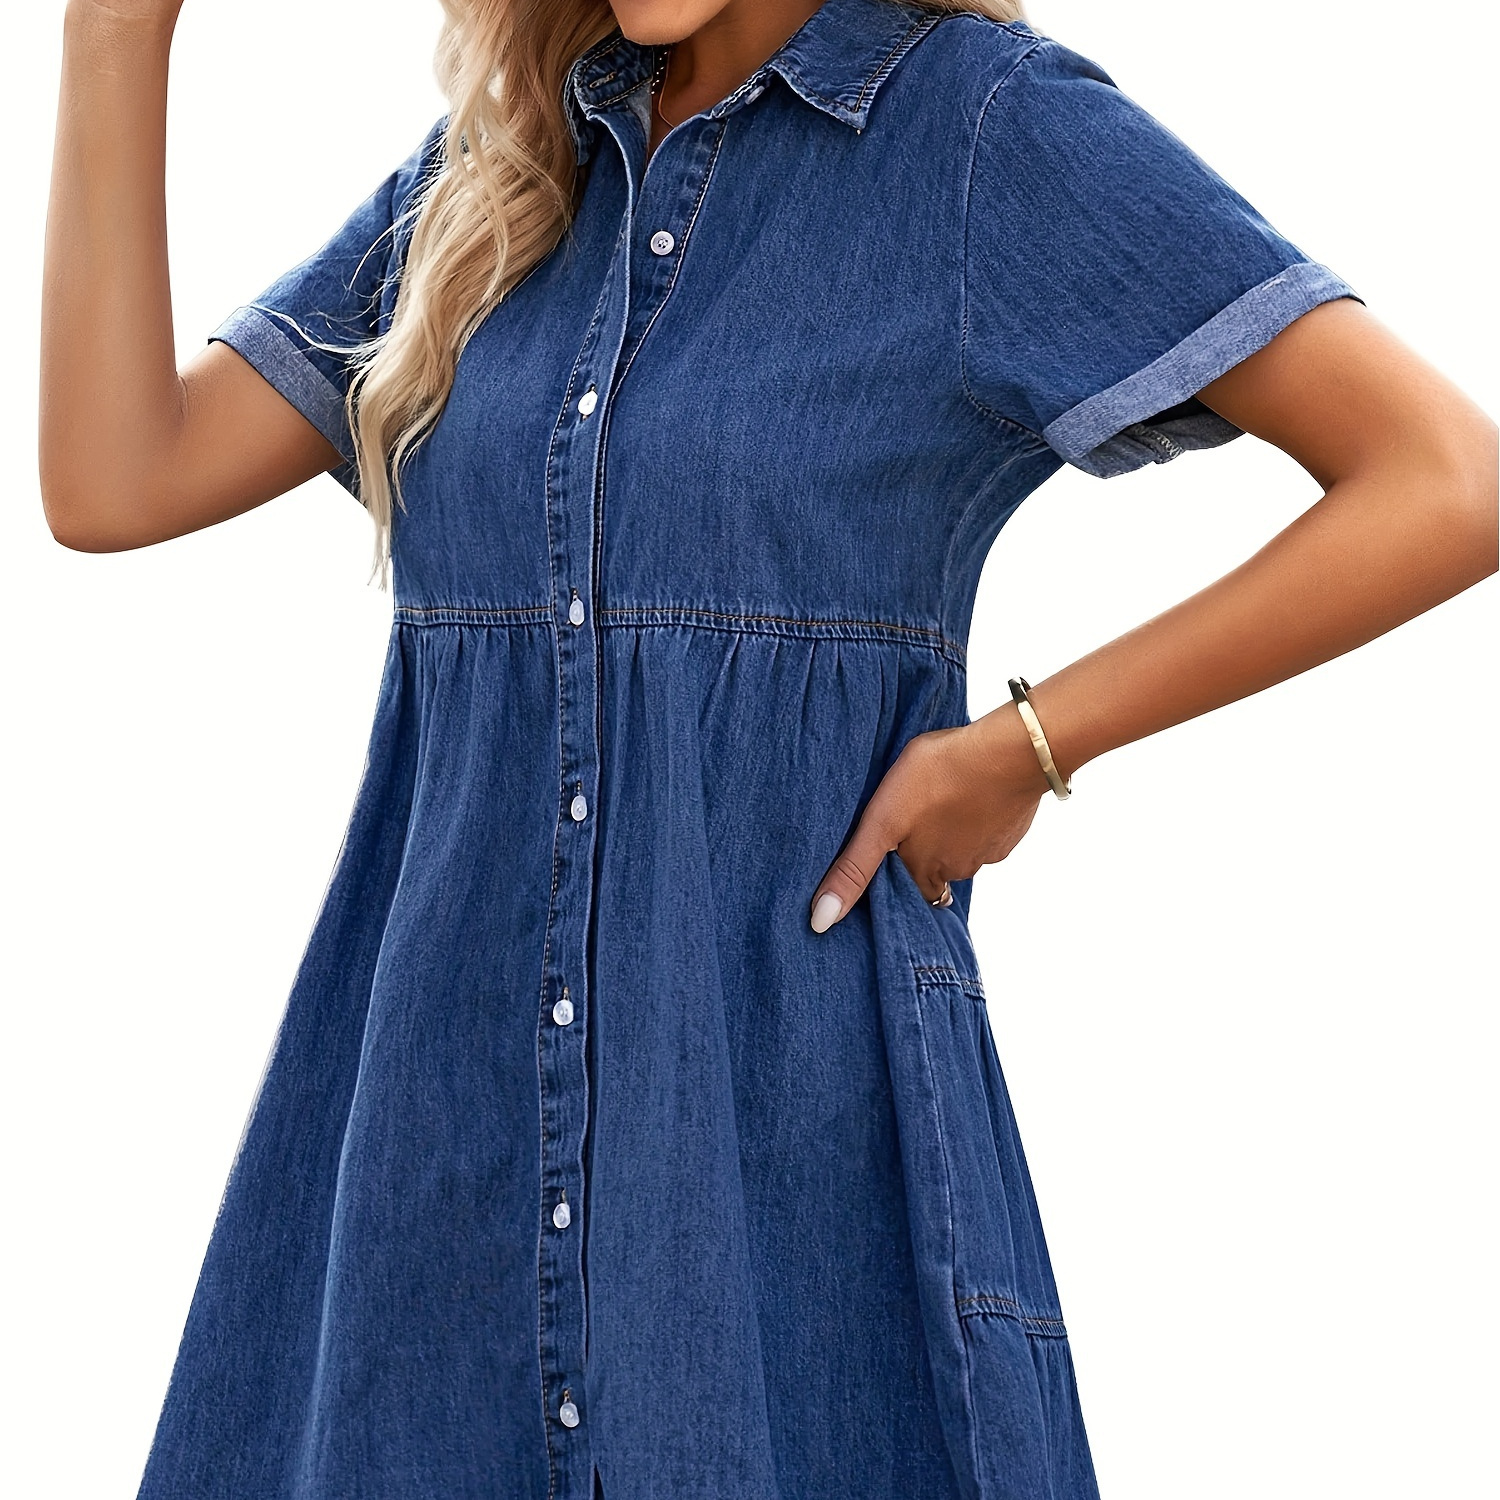 

Plain Washed Blue Tiered Layered Short Sleeve Buttons Closure Denim Dress, Women's Denim Jeans & Clothing